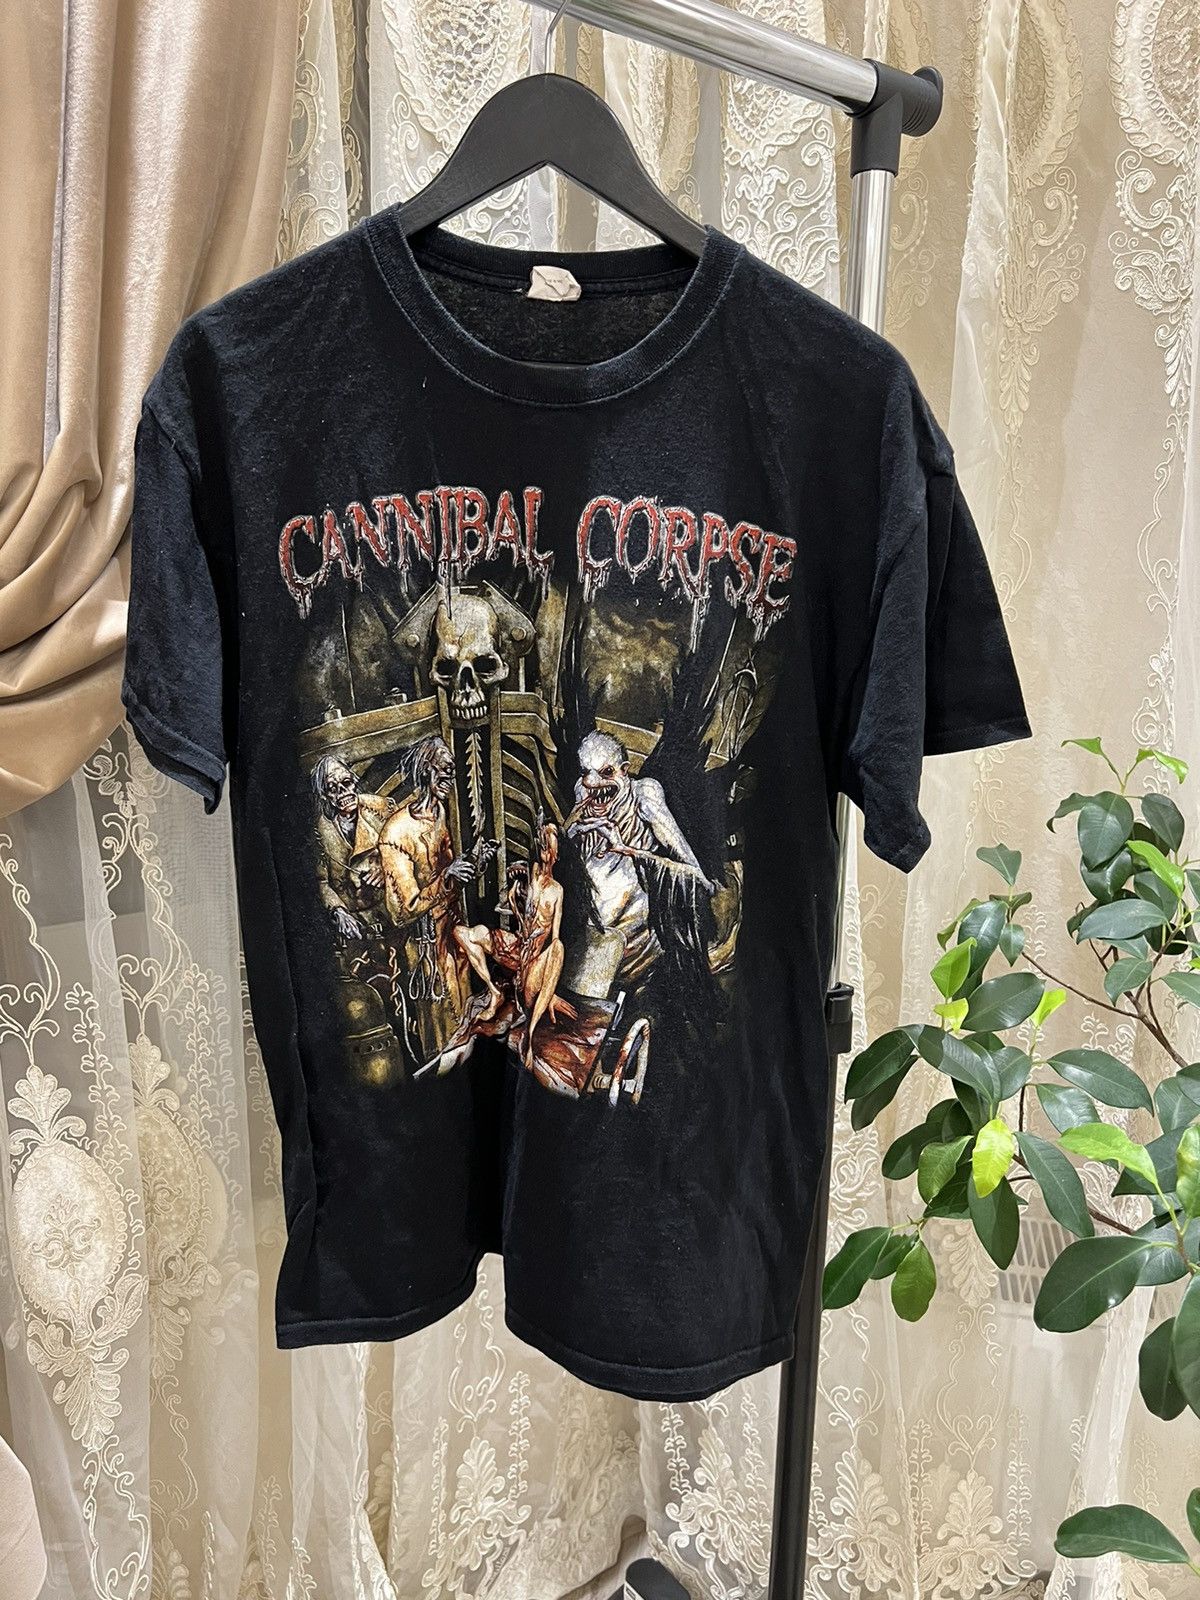 Pre-owned Band Tees X Rock Band Cannibal Corpse Vintage T Shirt 2004 Tour In Black